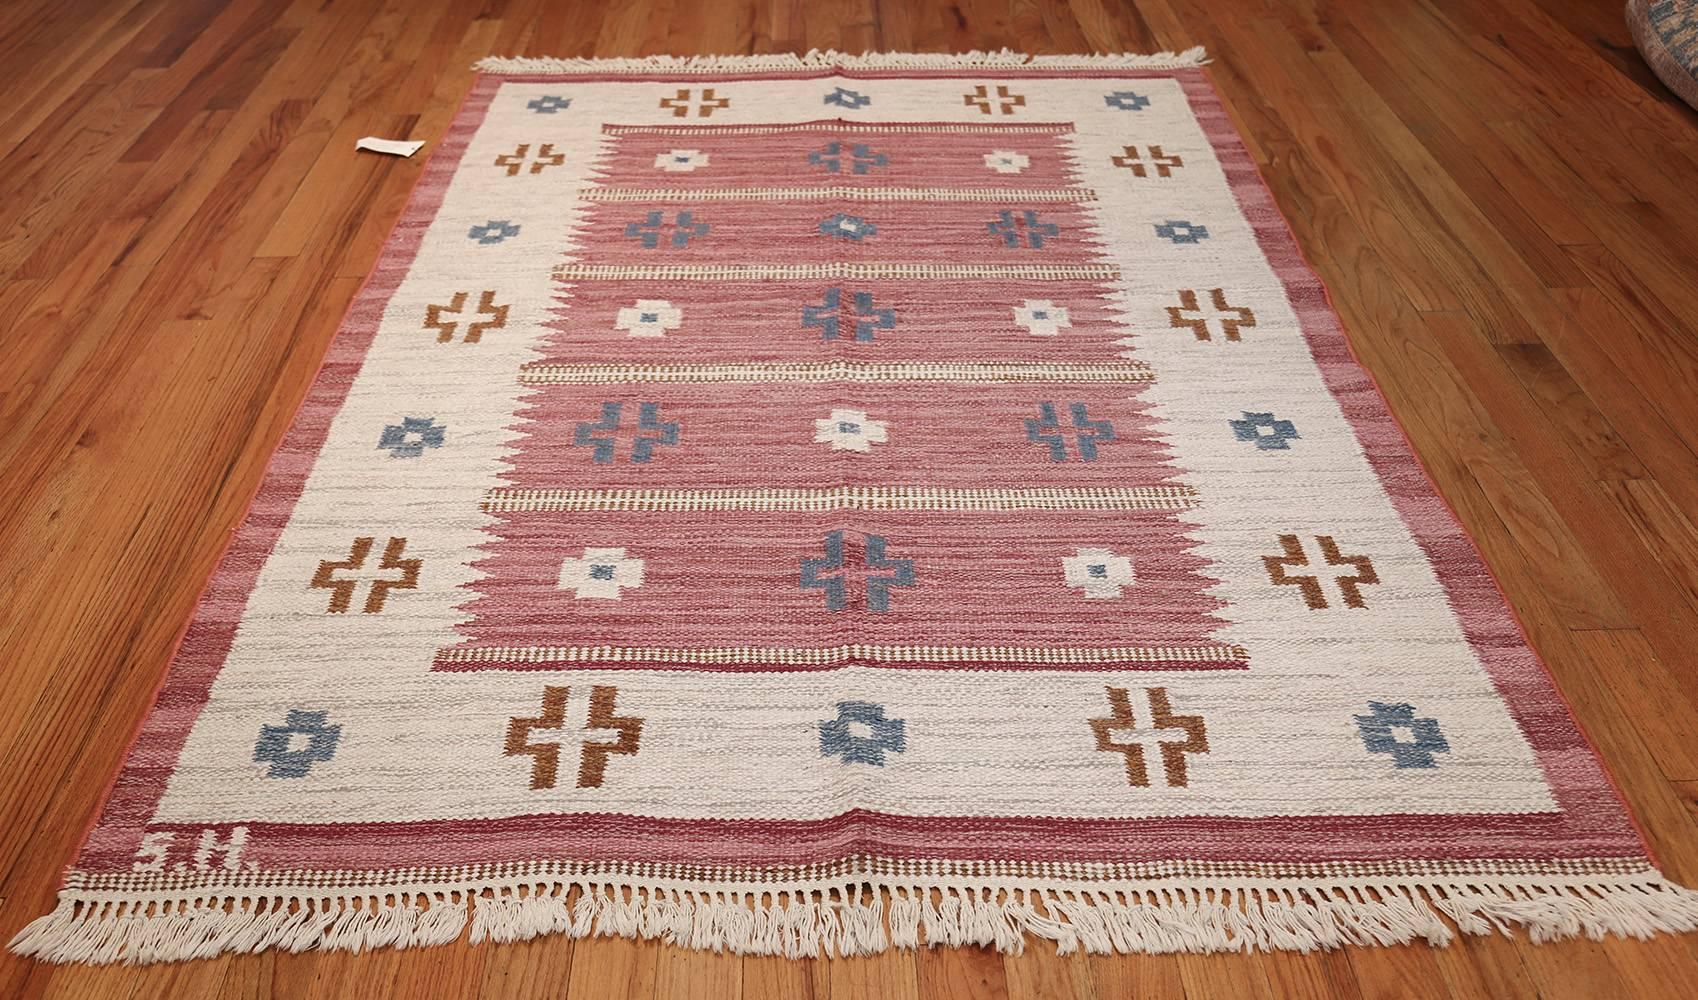 Vintage Swedish Kilim by Svensk Hemslojd, Origin: Sweden, circa mid-20th century. Size: 5 ft 5 in x 8 ft (1.65 m x 2.44 m)

A comely pallet of red, ivory, and blue, this charming Swedish kilim beautifully espouses some of the finer qualities of